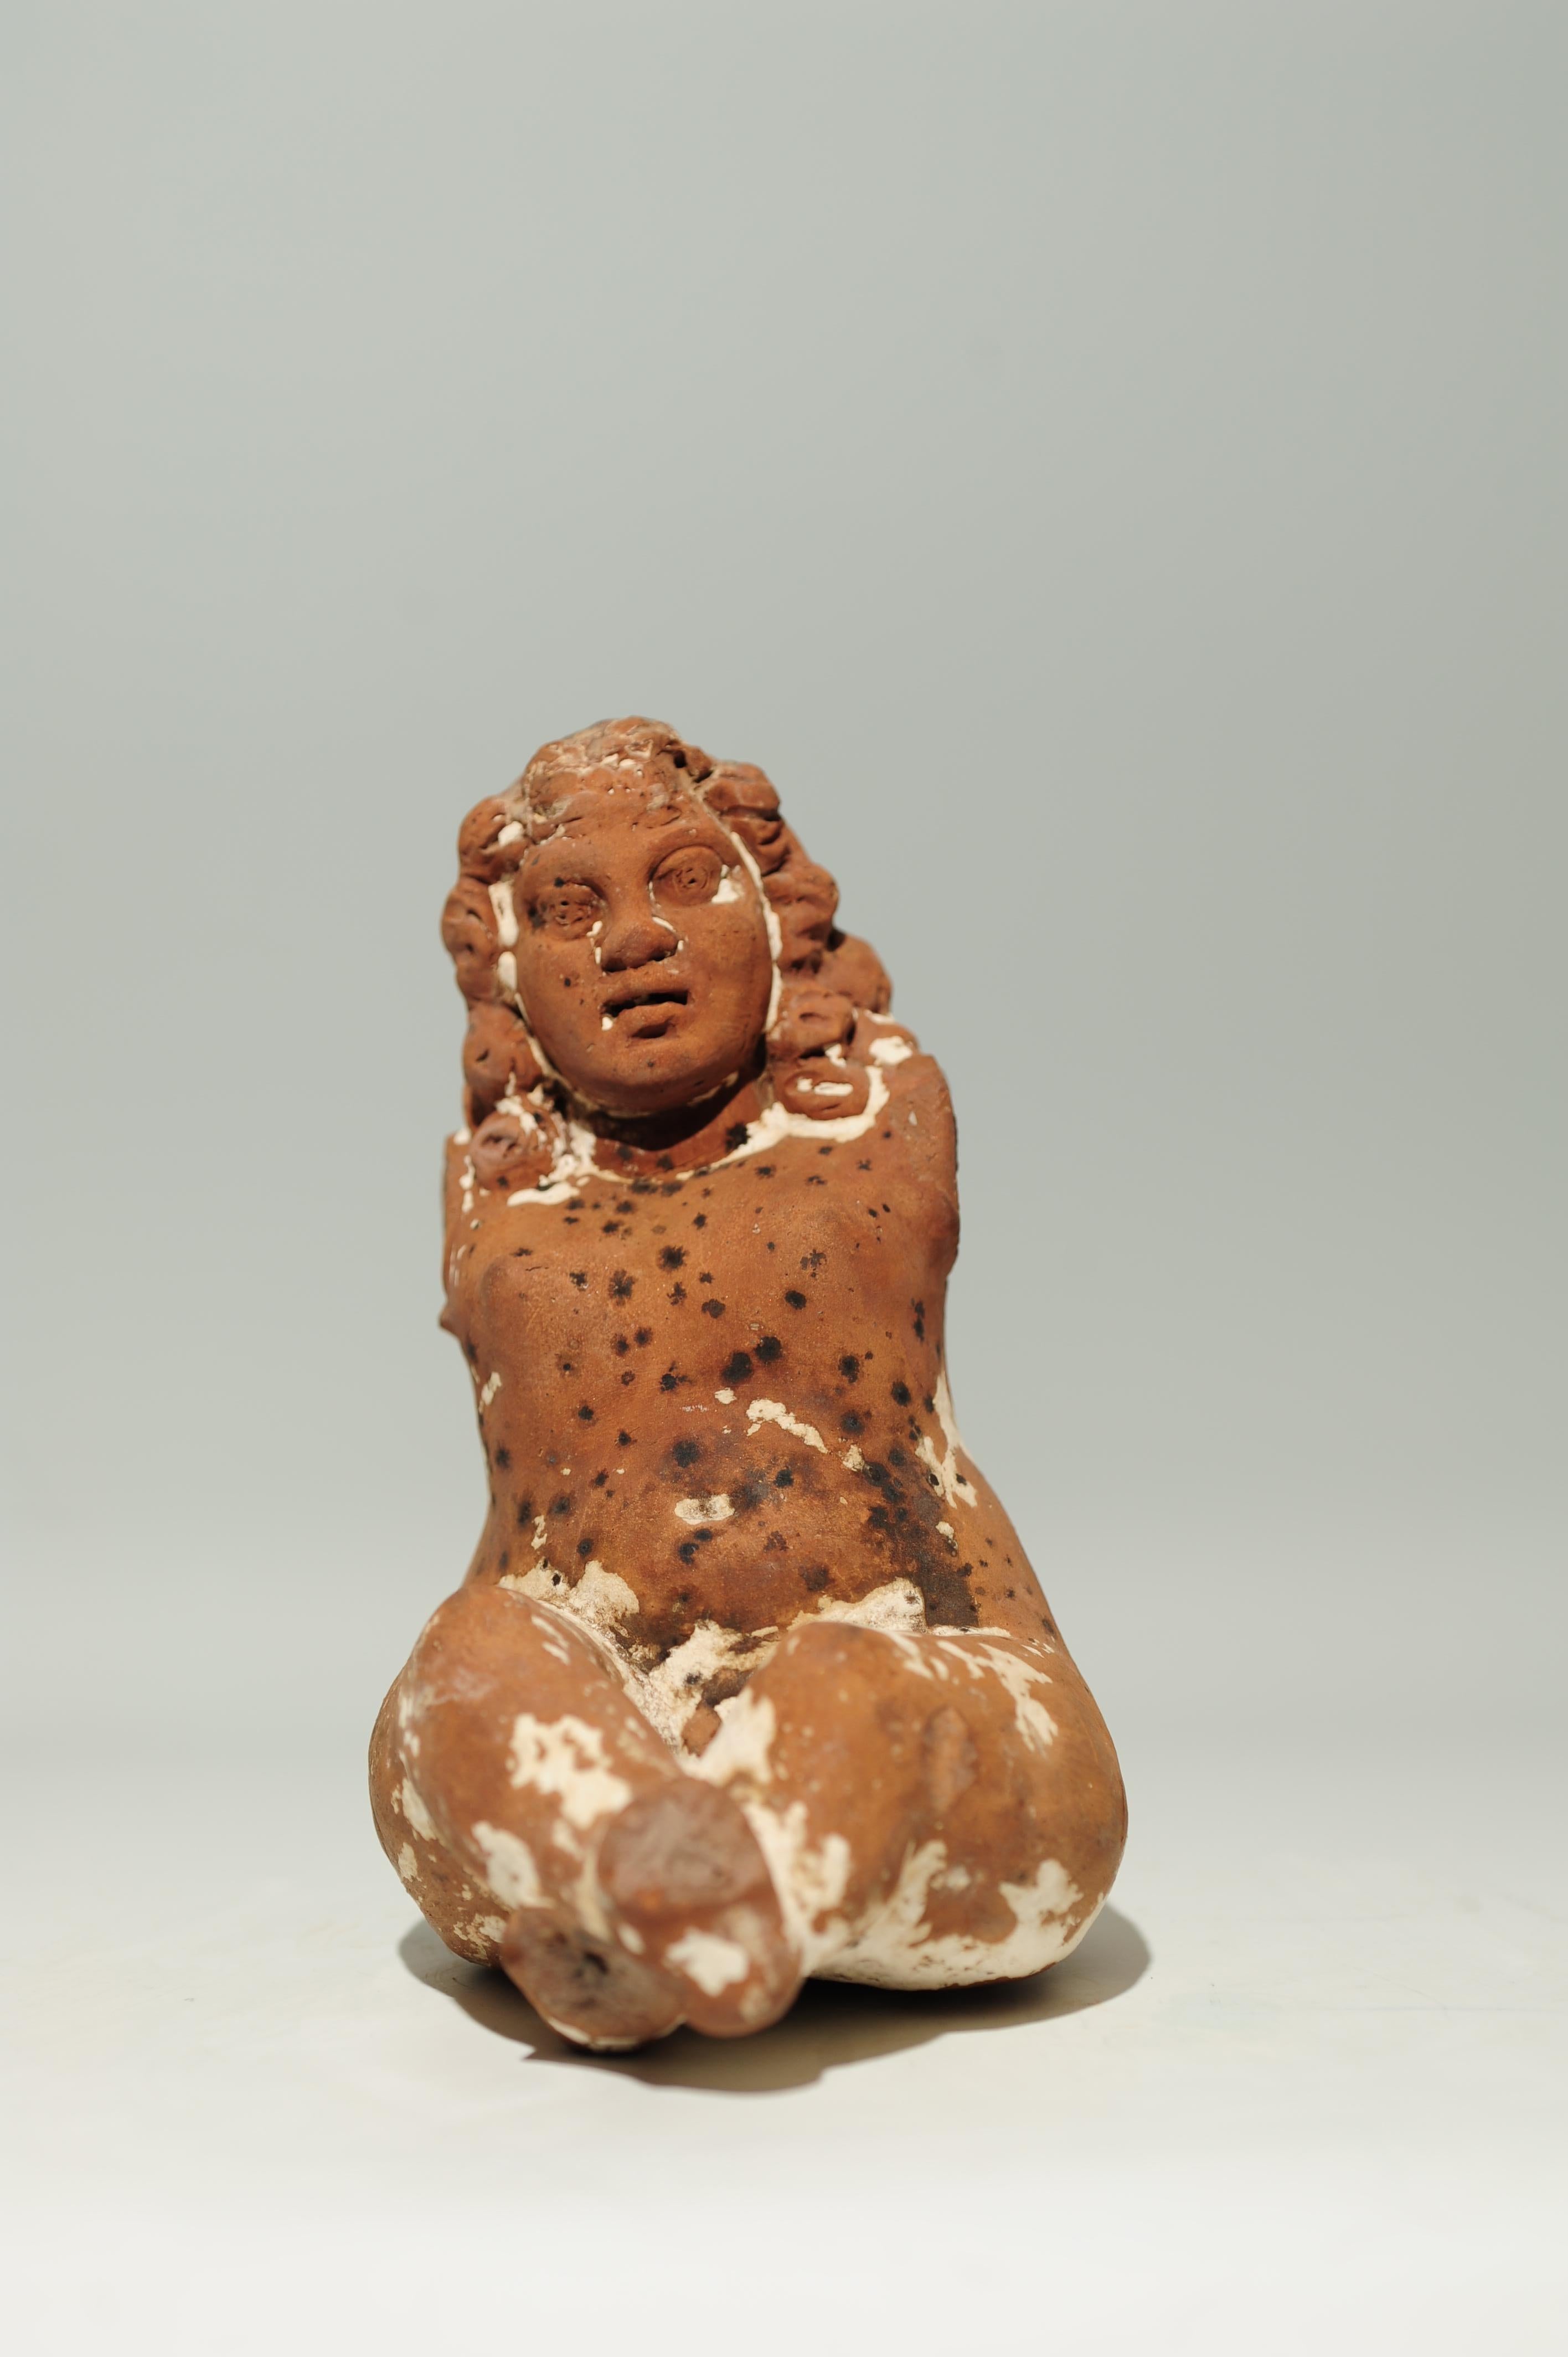 Molded. The stocky, bare boy sits with stretched, crossed legs on a surface that is no longer preserved today. The figure's head is turned slightly to the left. The shoulder-length wavy hair is reproduced as a compact mass. The back of the chubby